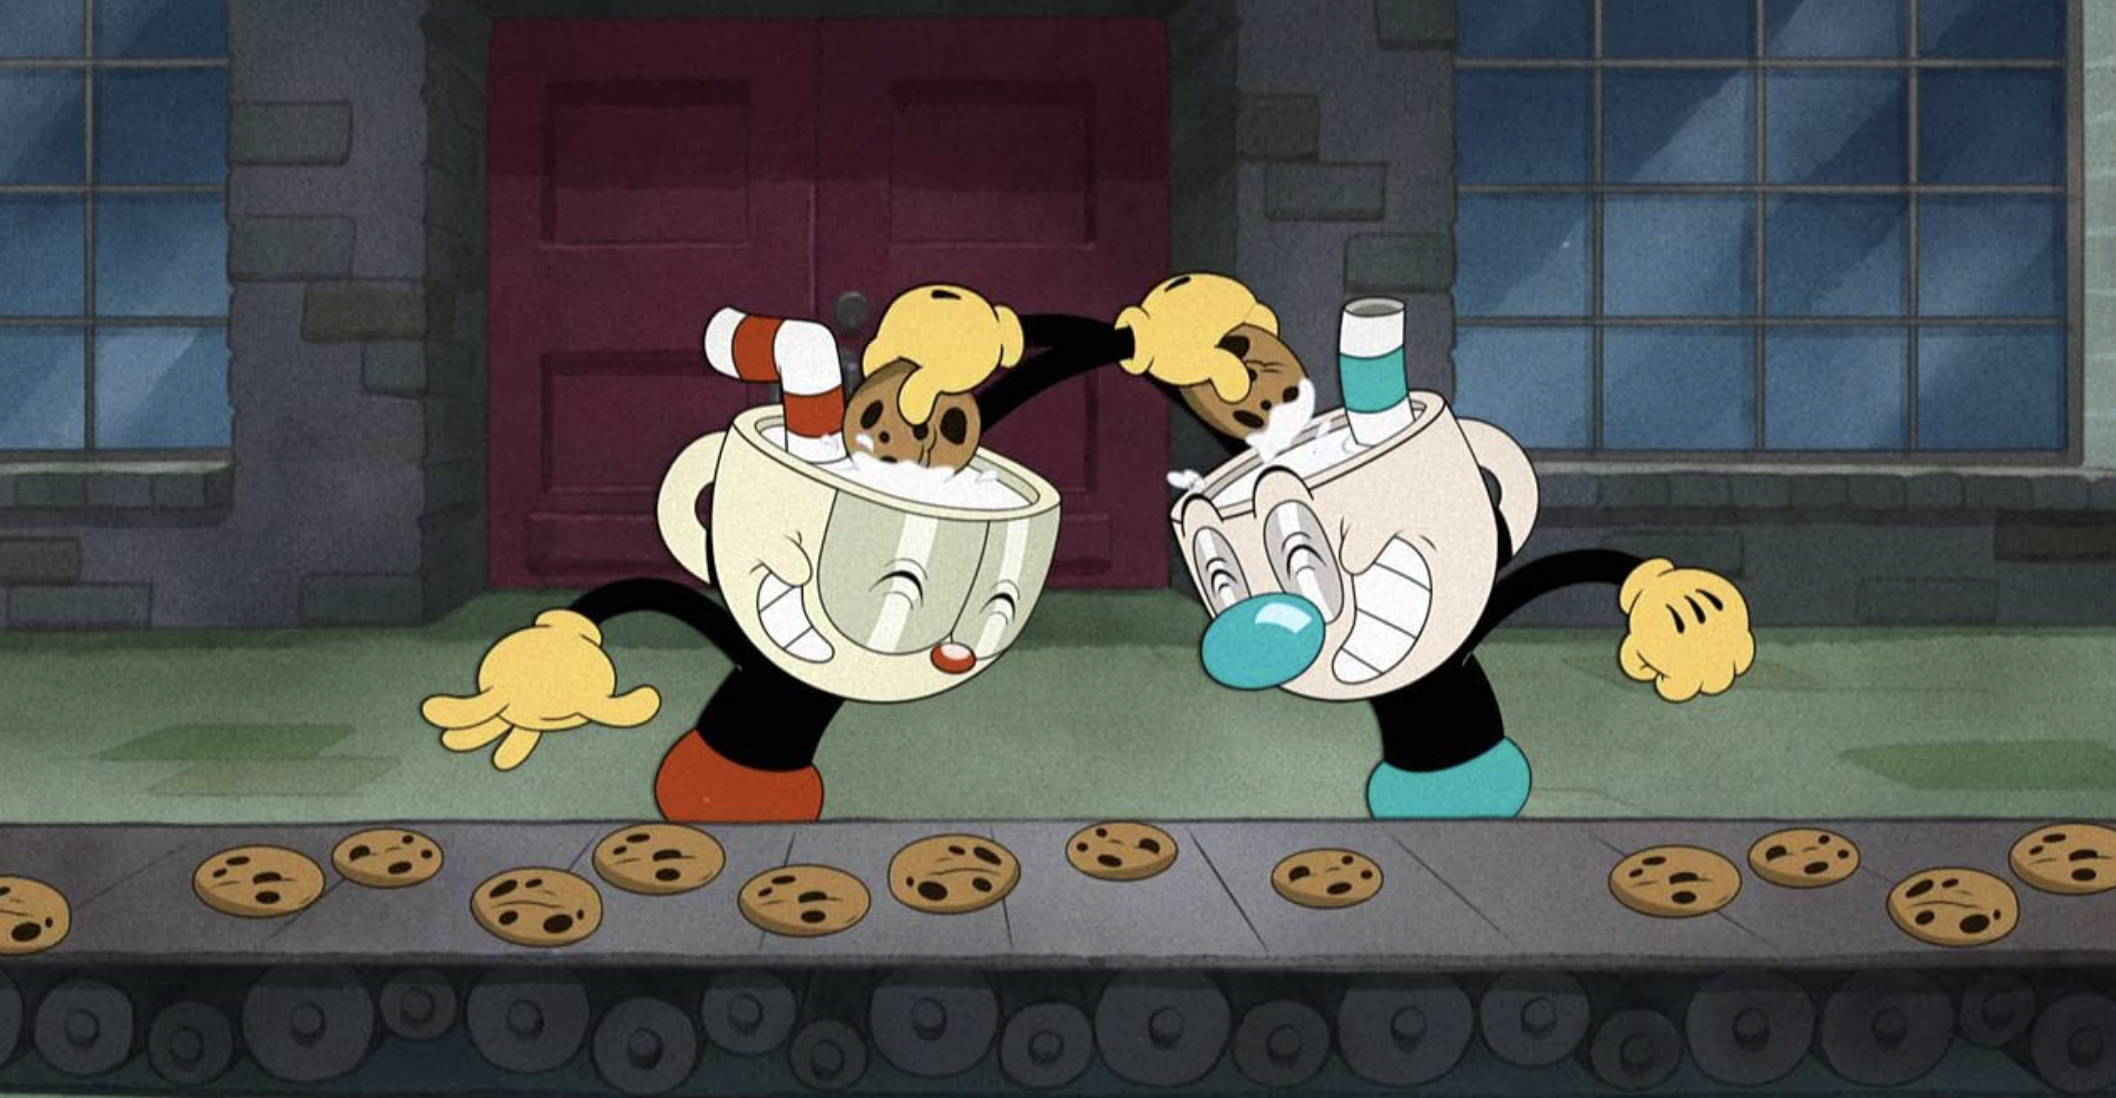 The Cuphead Show Review – The Villager